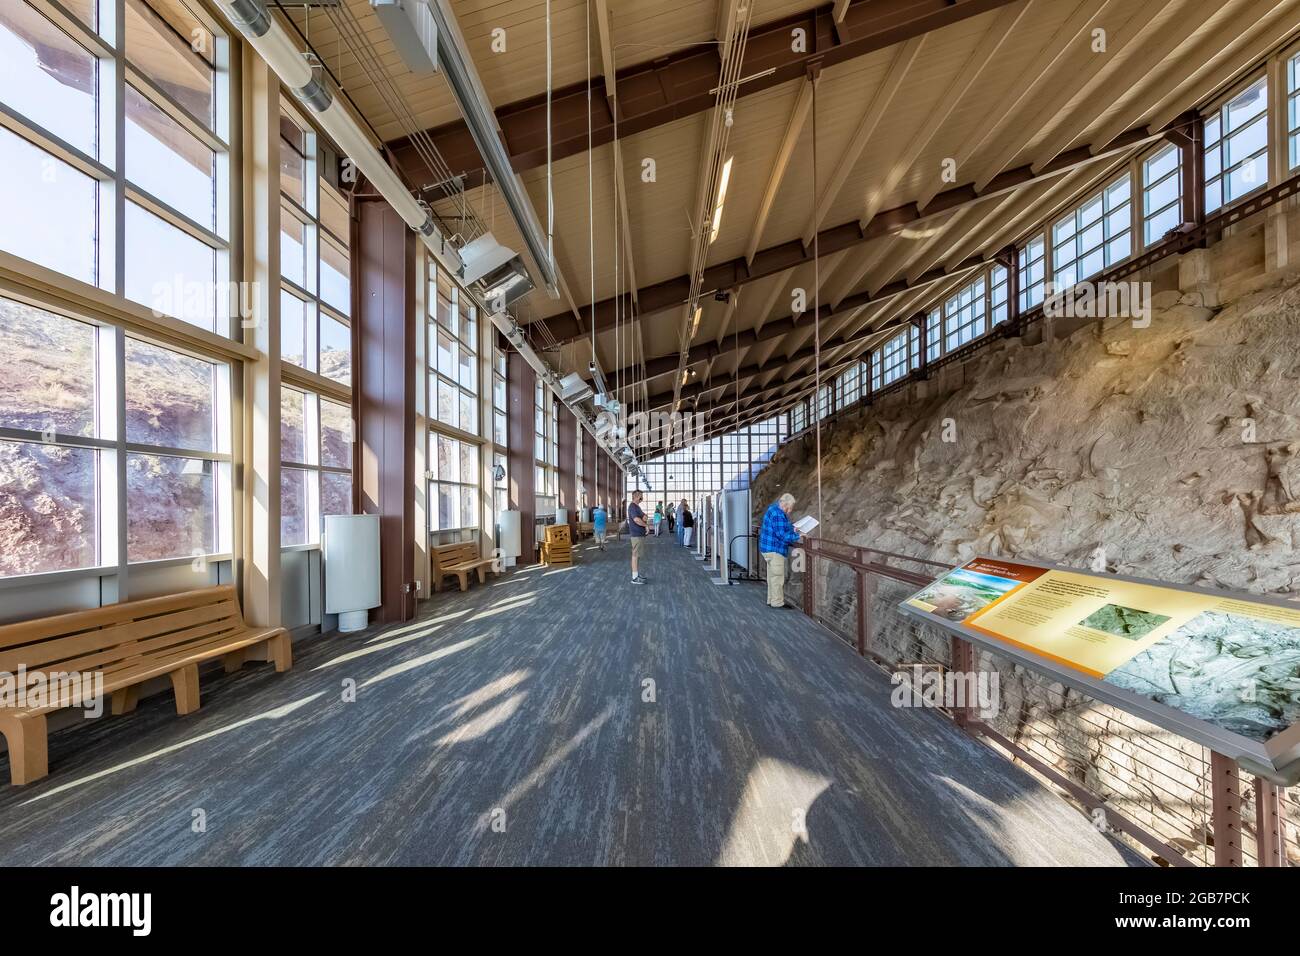 Modernist architecture of the Quarry Exhibit Hall, designed by Anshen and Allen as part of the Mission 66 NPS effort, in Dinosaur National Monument on Stock Photo